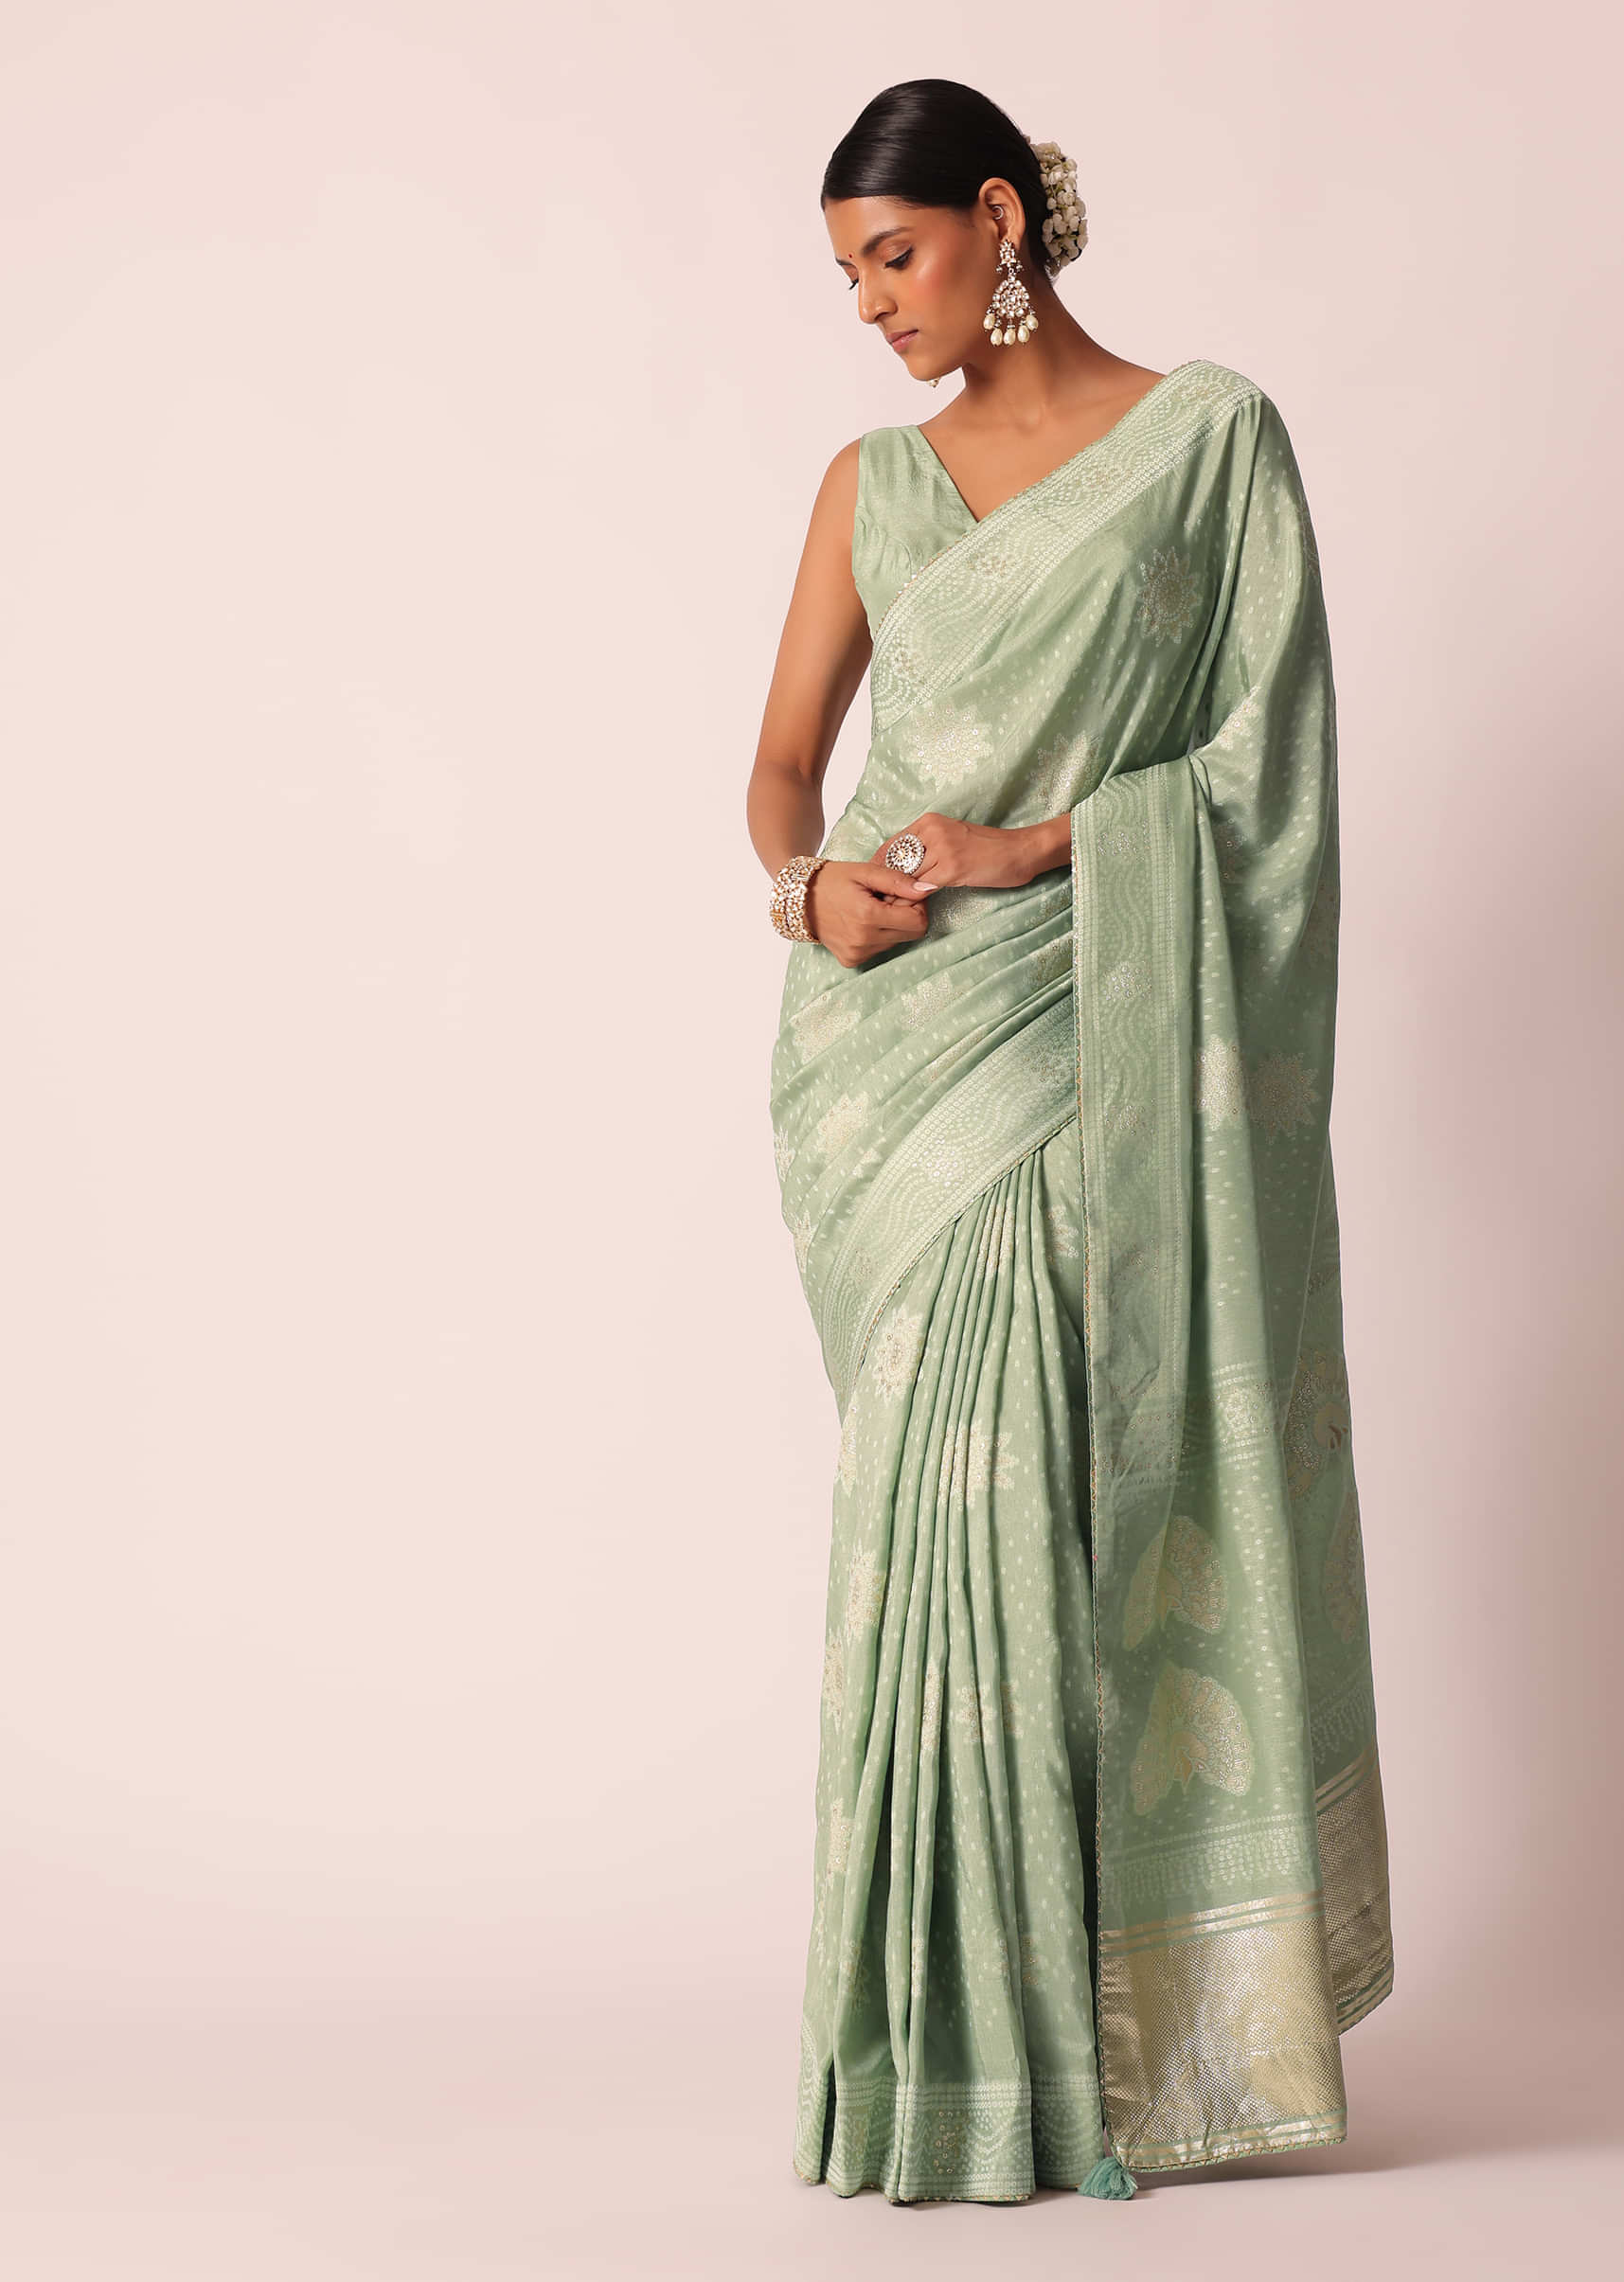 Buy Pista Green Bandhani Saree With Zari Detail And Unstitched Blouse Piece